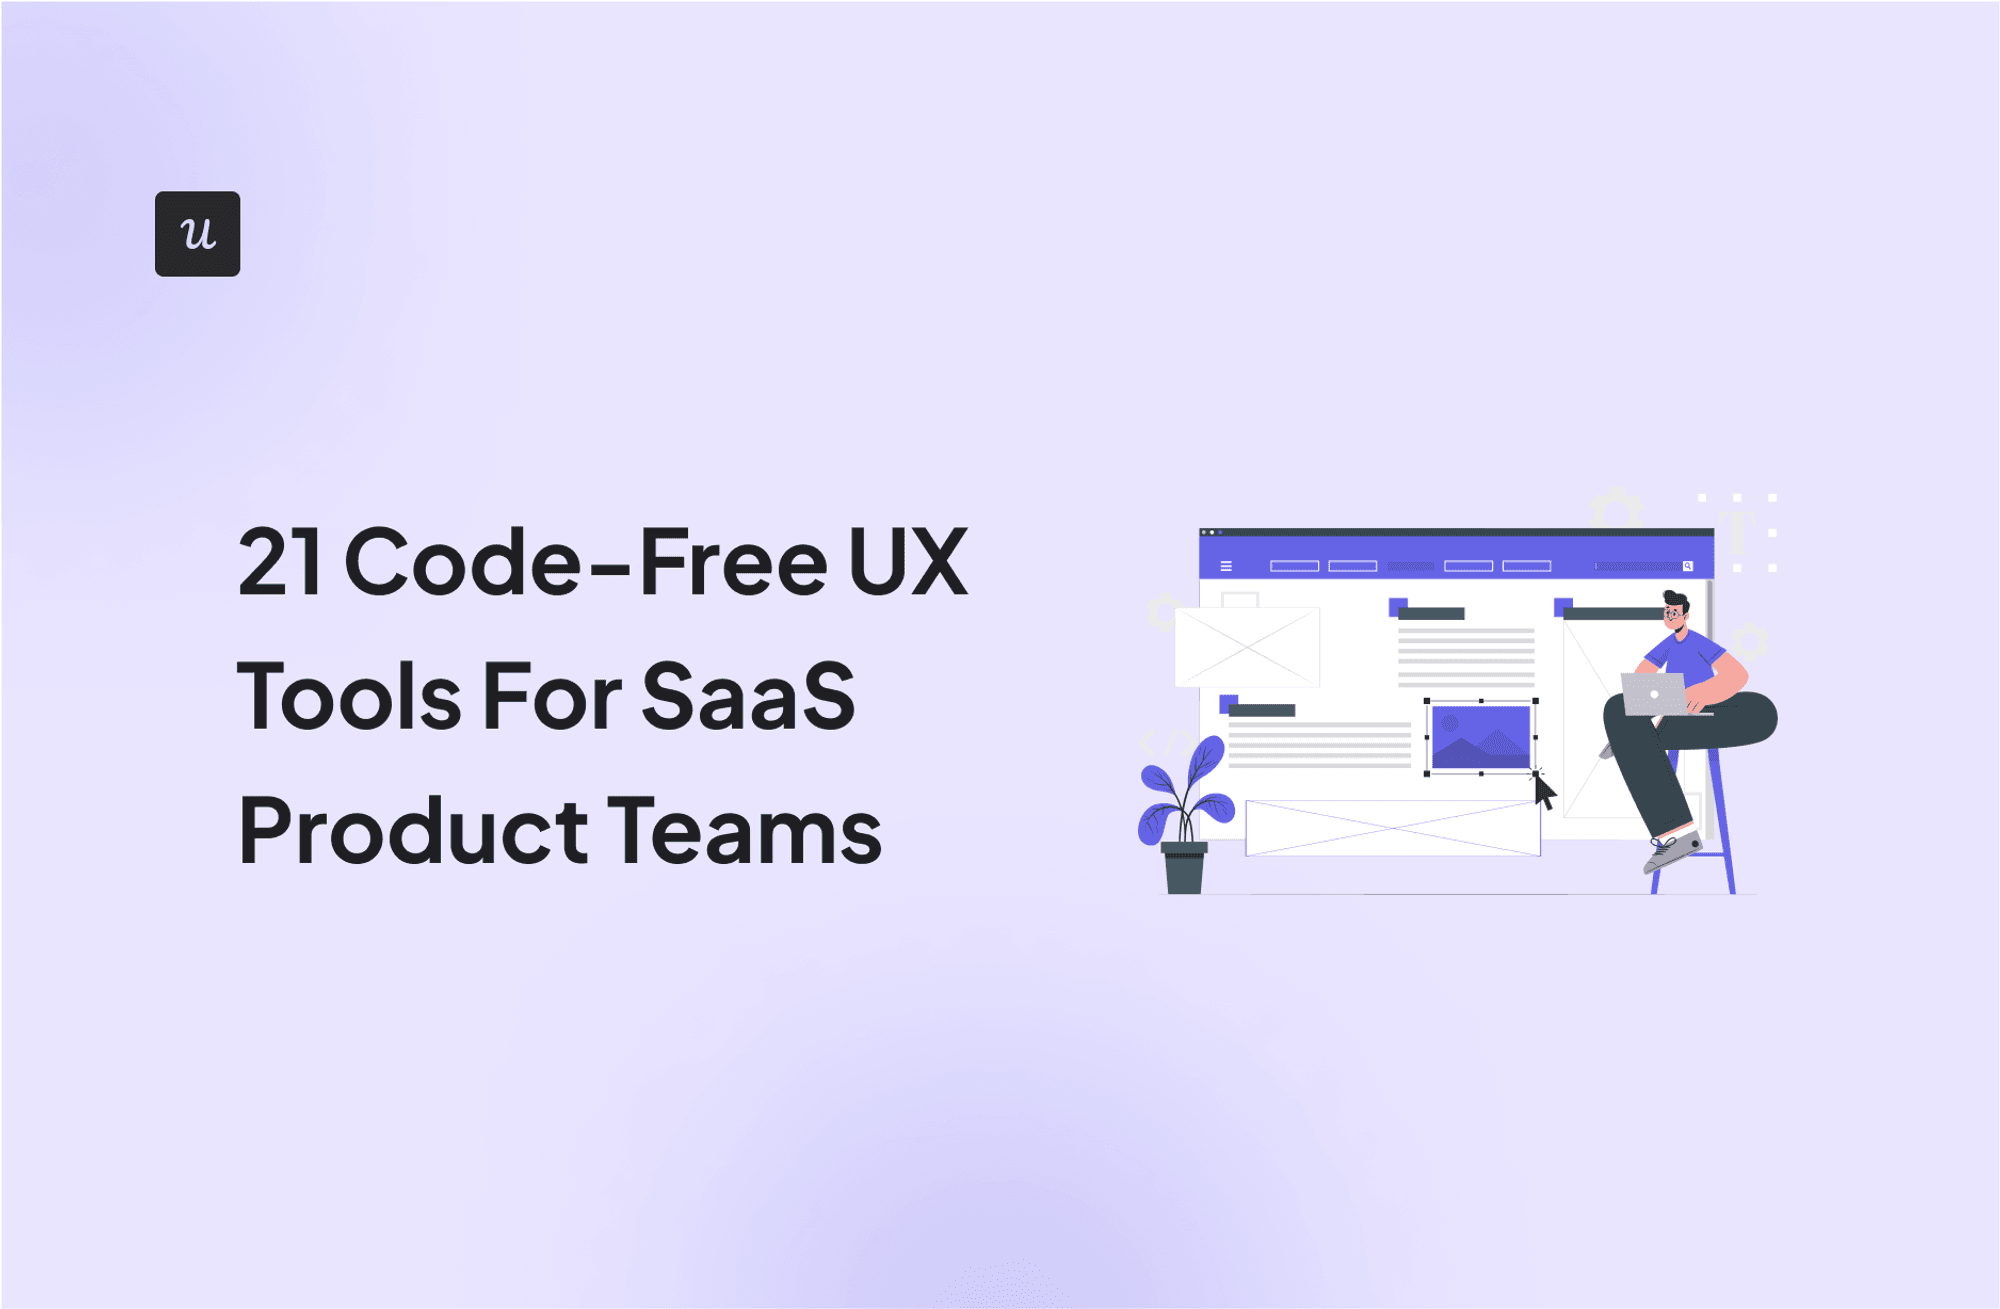 21 Code-Free UX Tools For SaaS Product Teams cover